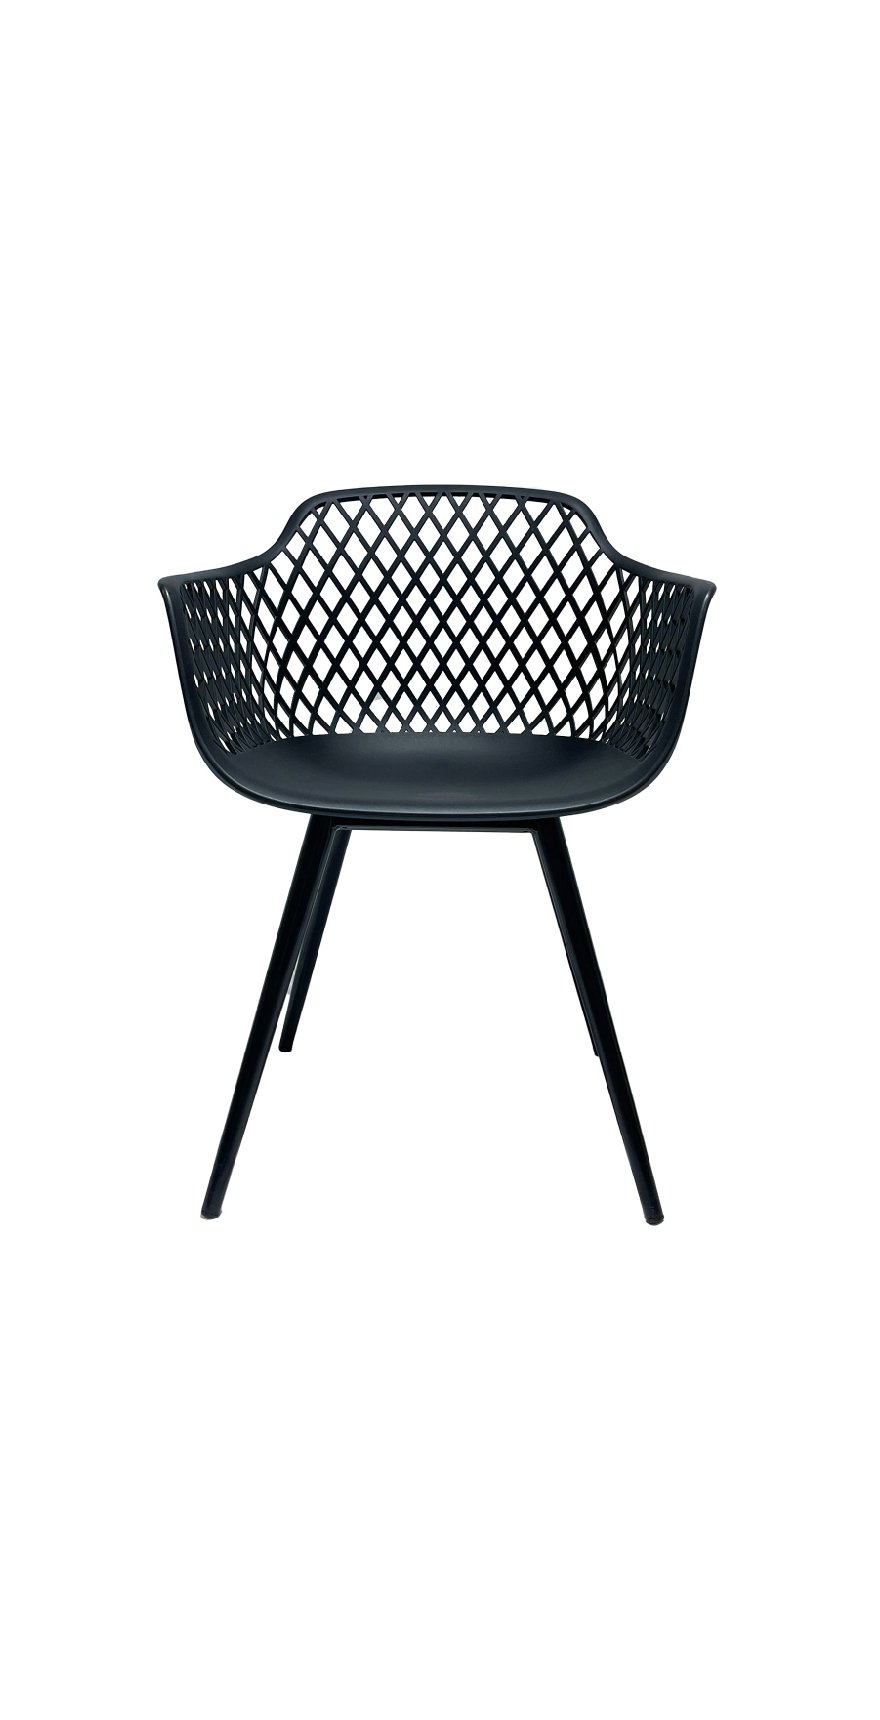 Reinforced Plastic Chair for Inside and Outside BrackenStyle Pearl Grey Polypropylene Chair Commercial and home use 